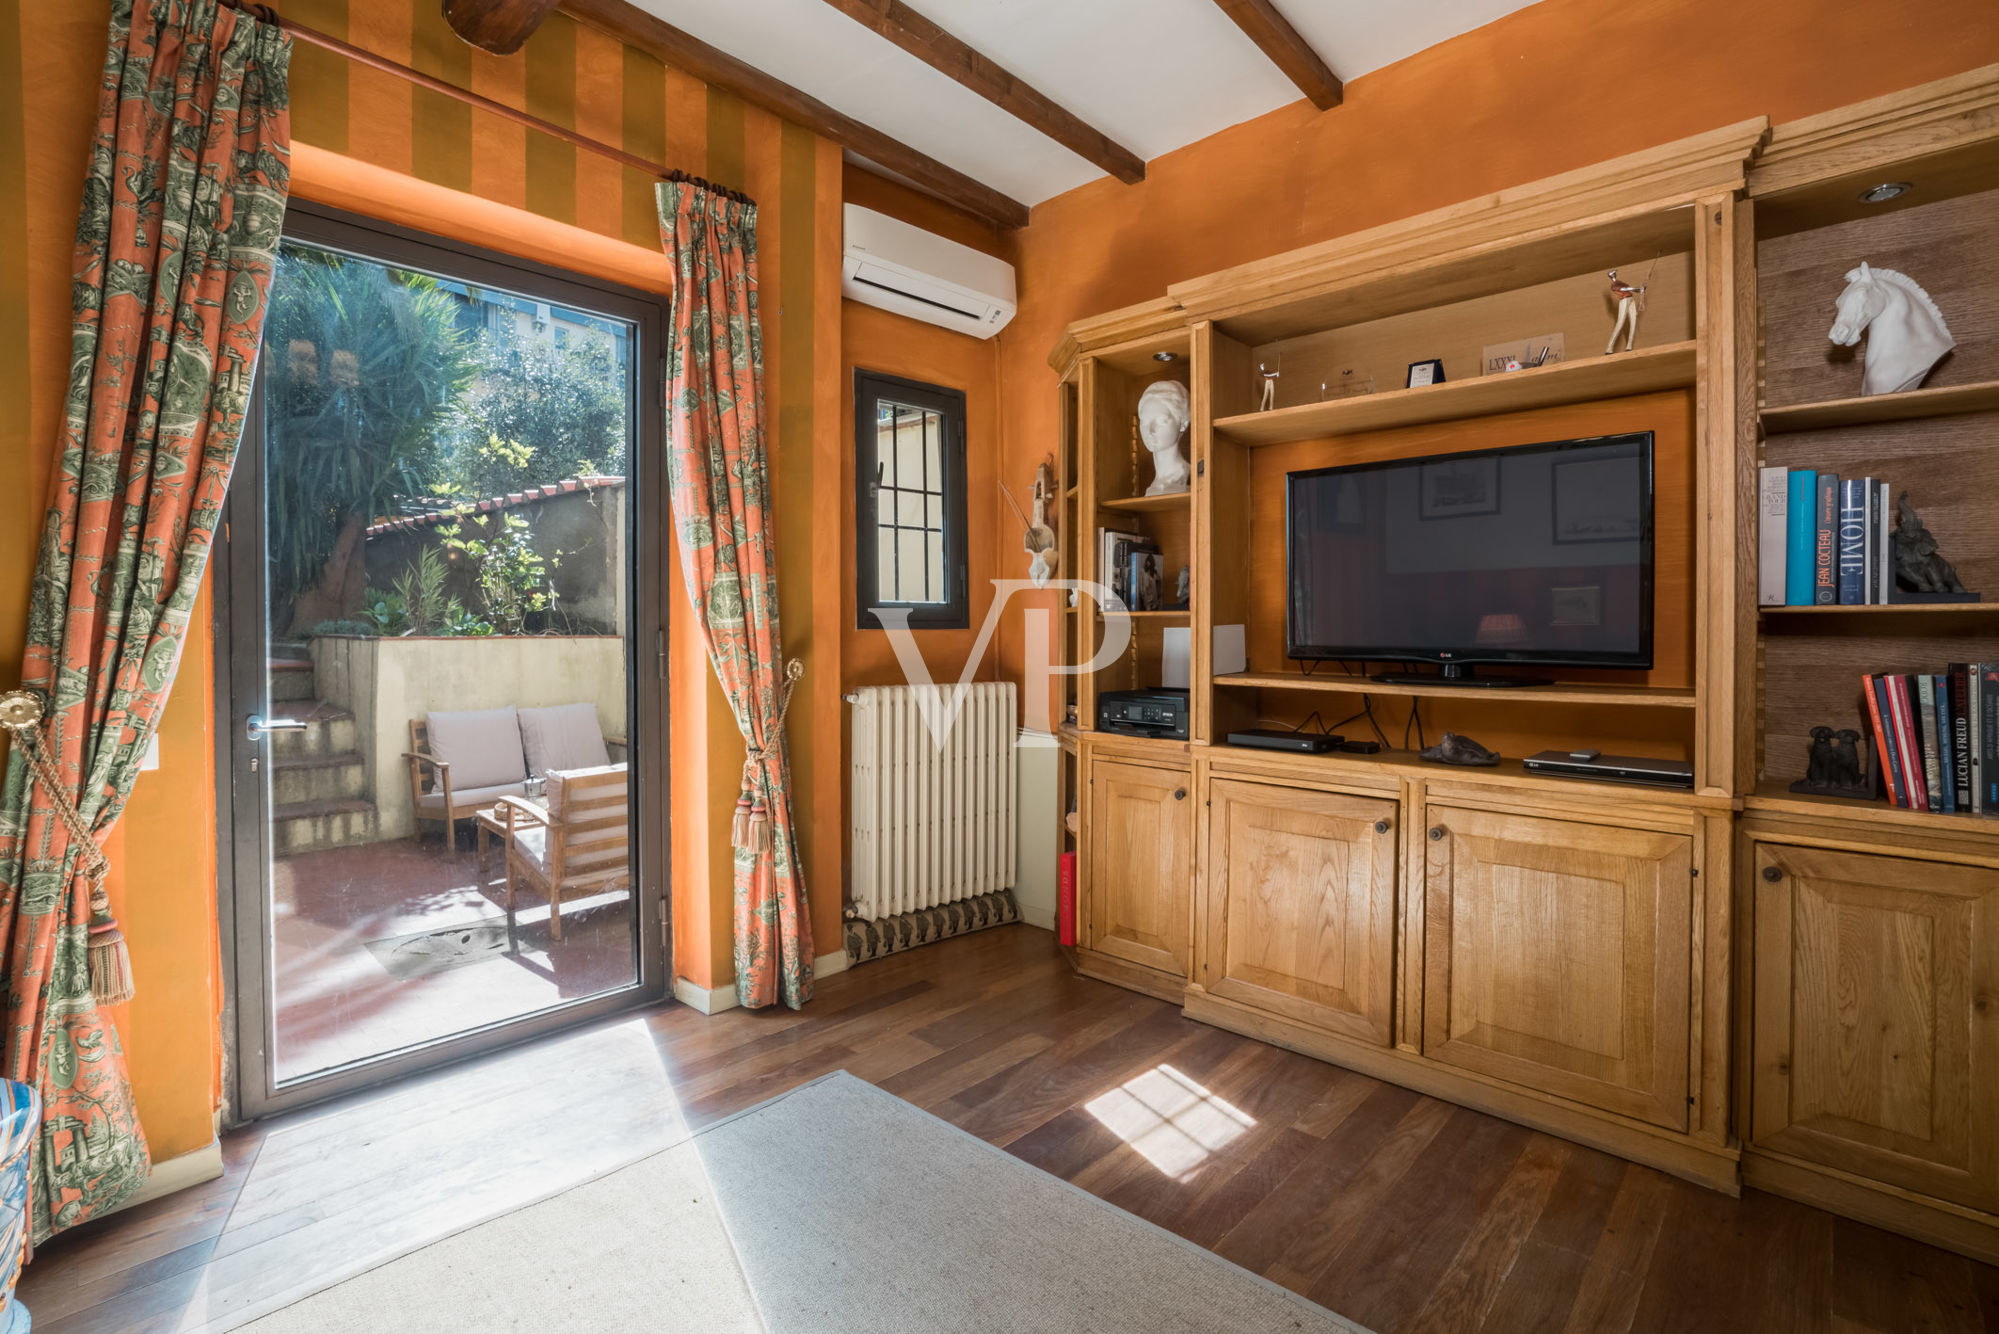 Gorgeous apartment with garden in Oltrarno, Florence